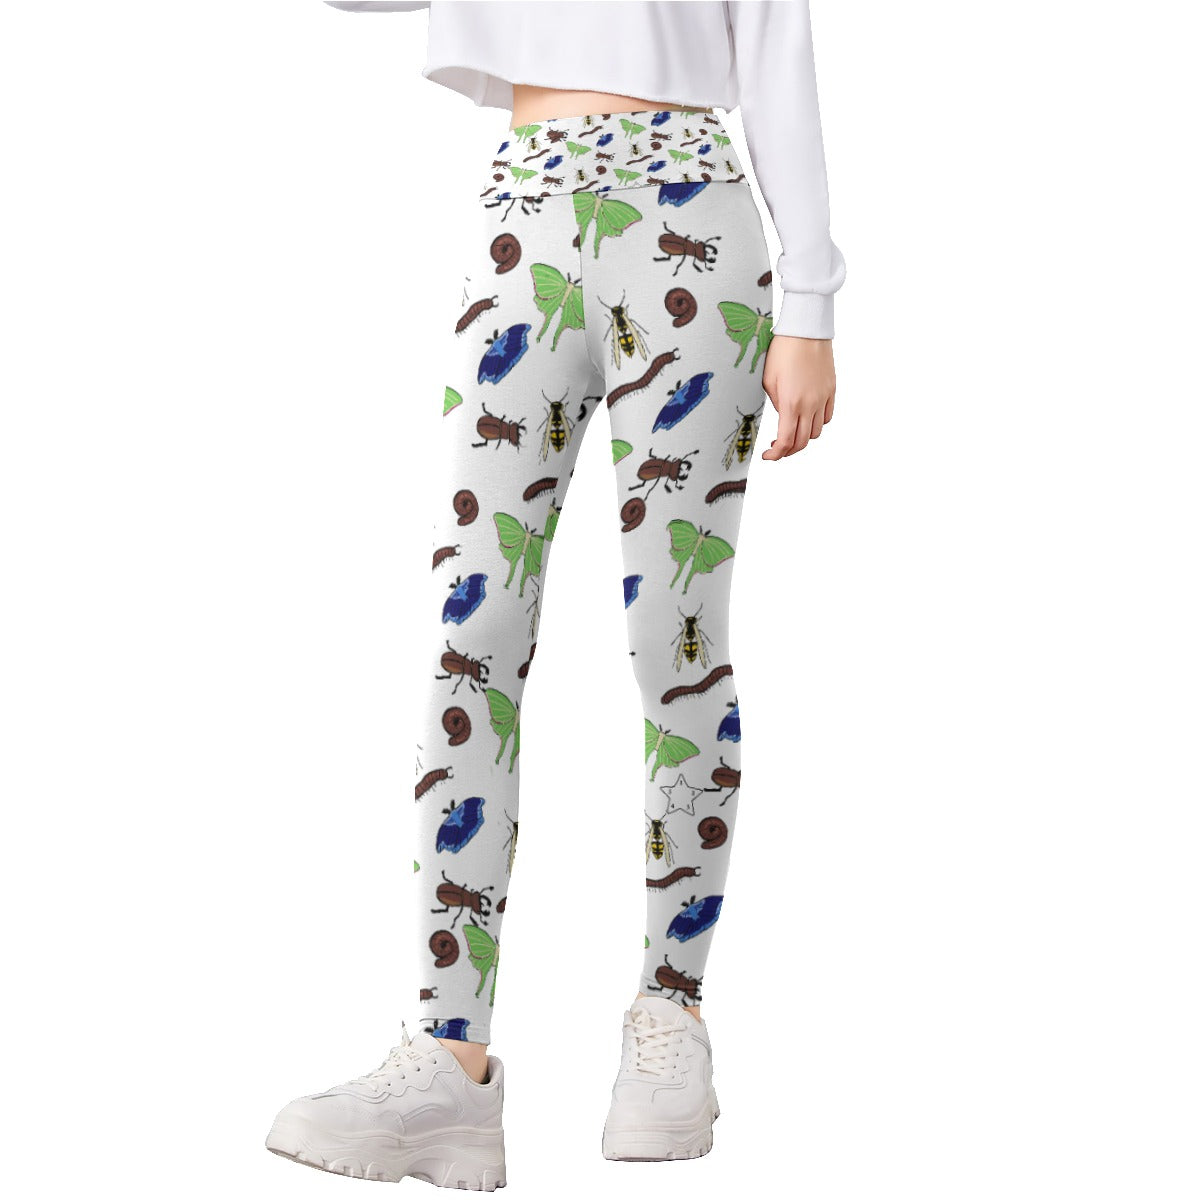 Girls Bug Leggings with Star - Clothes that Calm